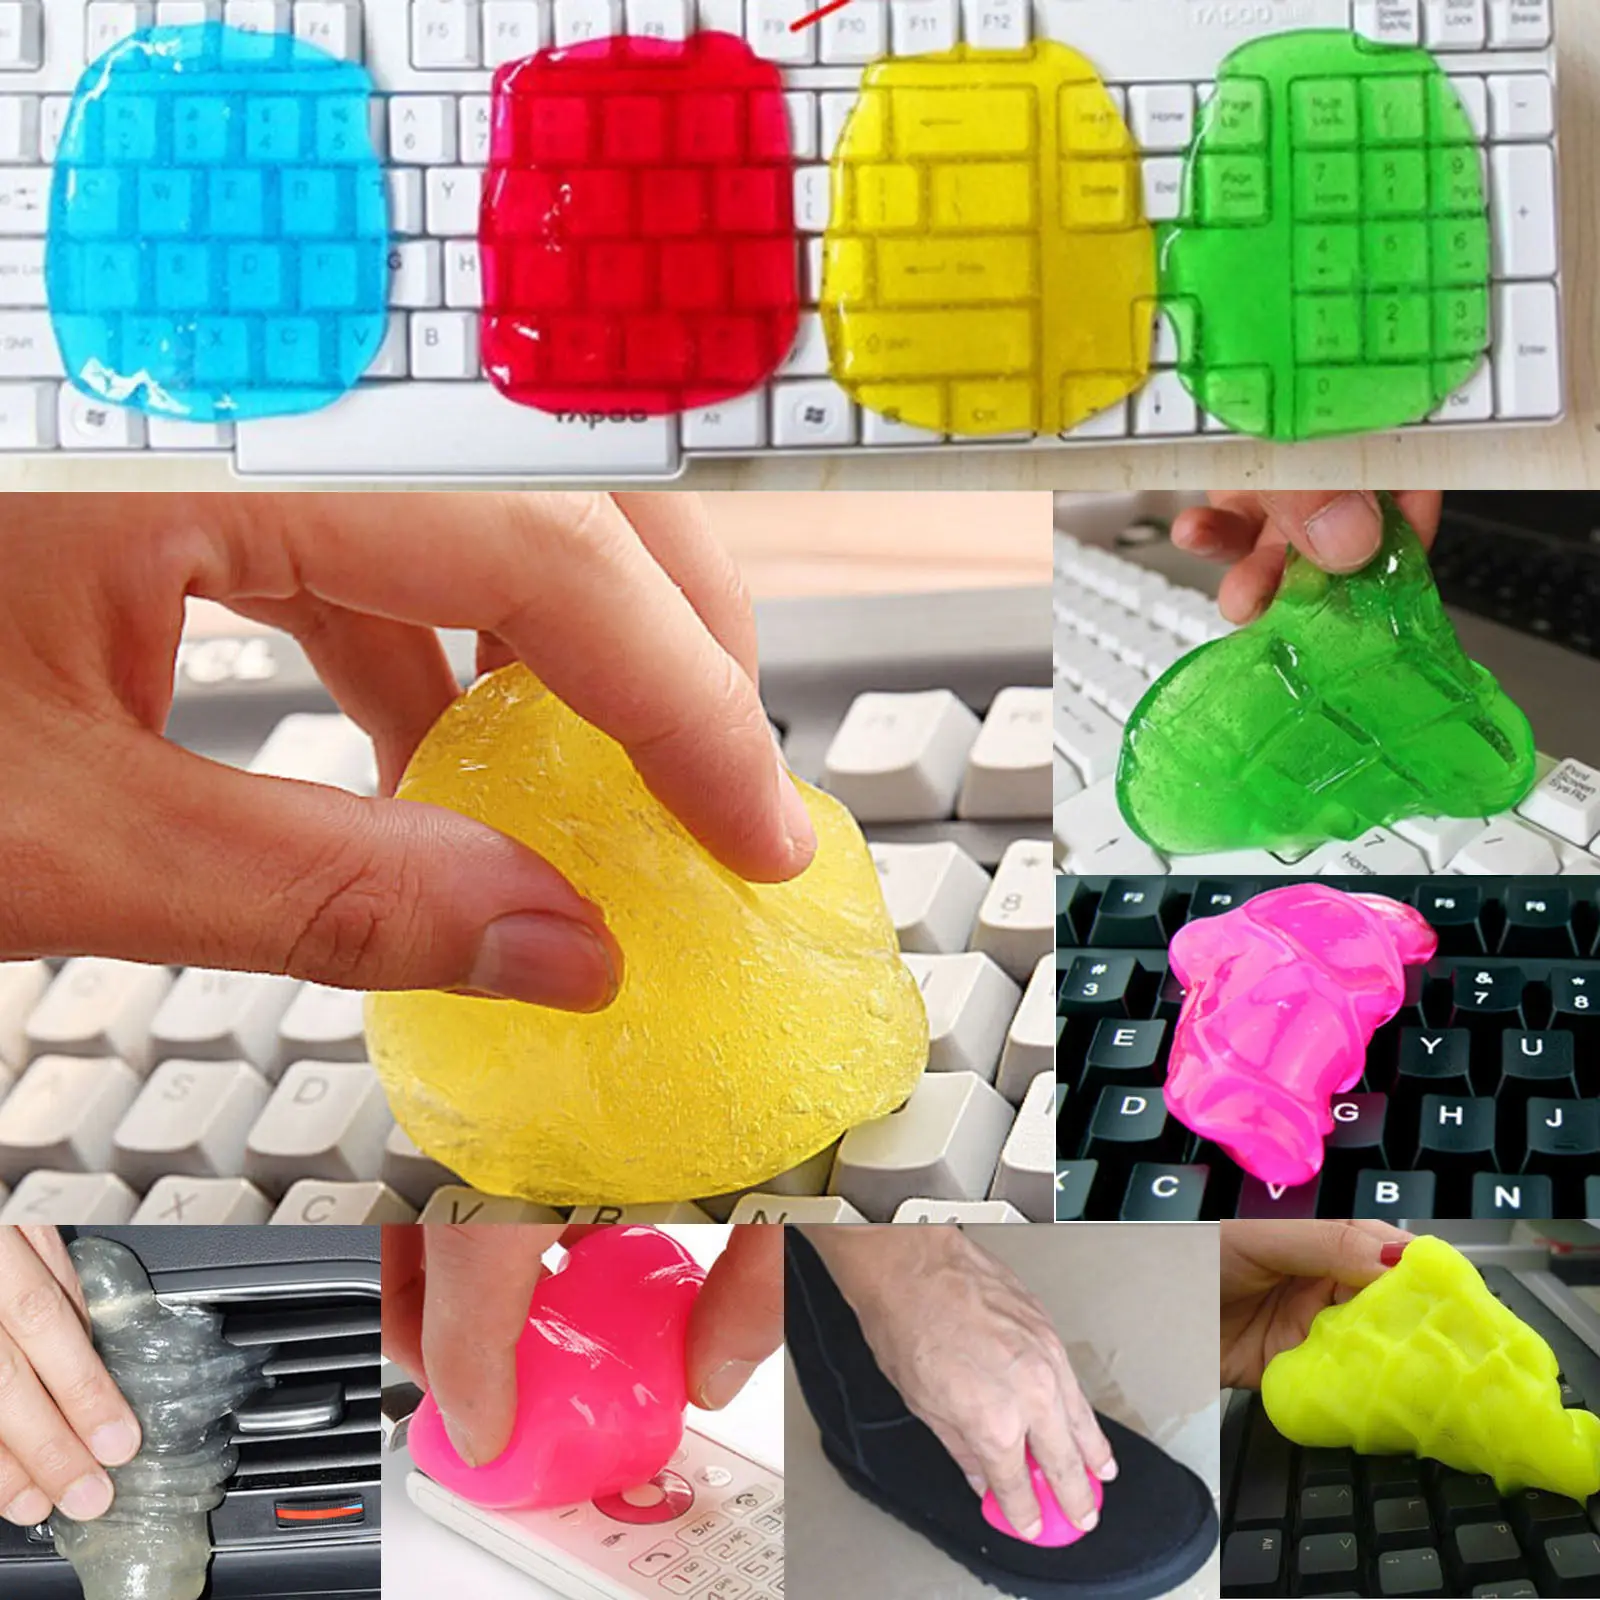 

Magic Car Cleaning Sponge Products Auto Universal Cyber Super Clean Glue Microfiber dust clean tools Wiper For Keyboard Randomly